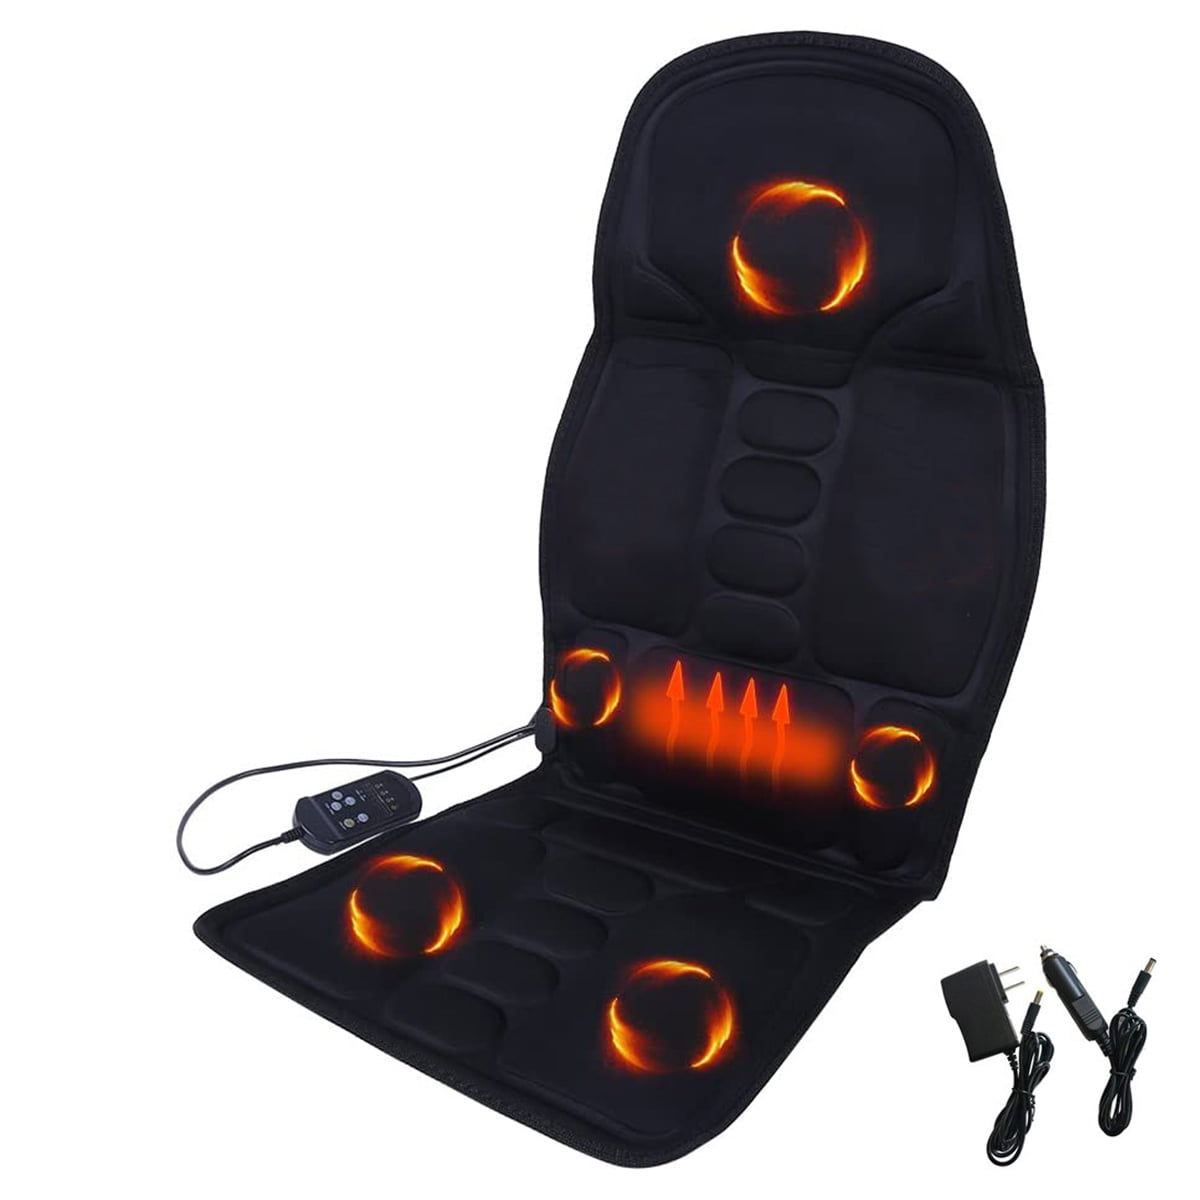 Vibrating Back Massager for Chair Massage Cushion Shoulder and Thighs Seat Massager with Heat 8 Vibrating Nodes to Relieve Stress and Fatigue for Back 